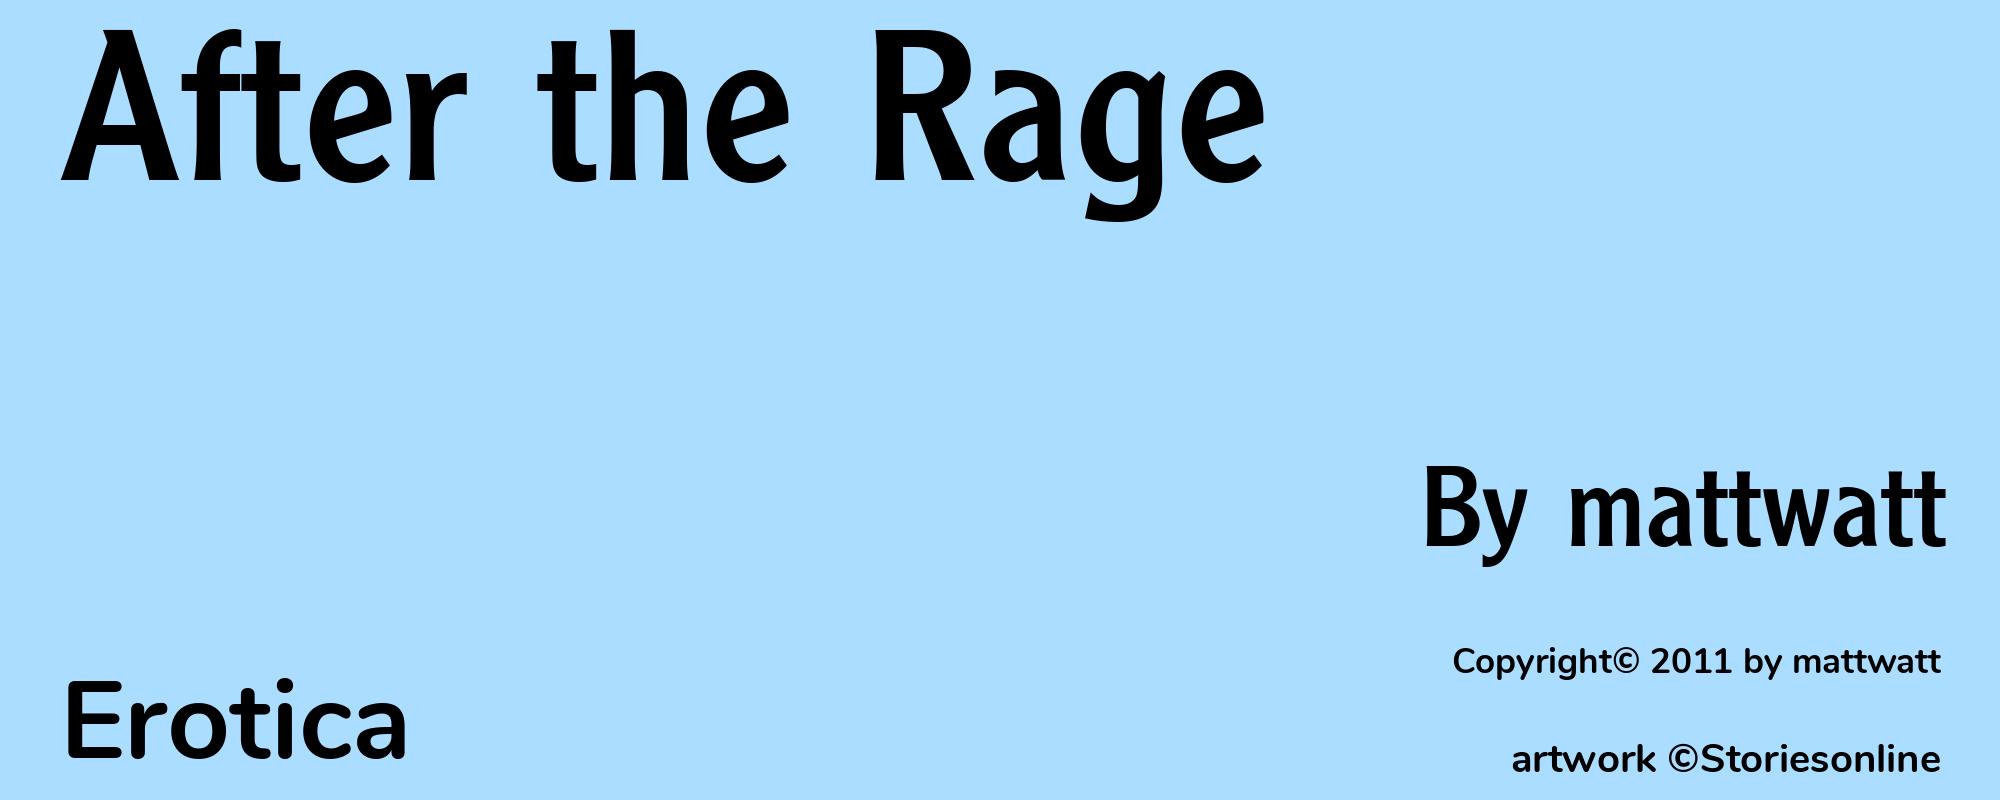 After the Rage - Cover